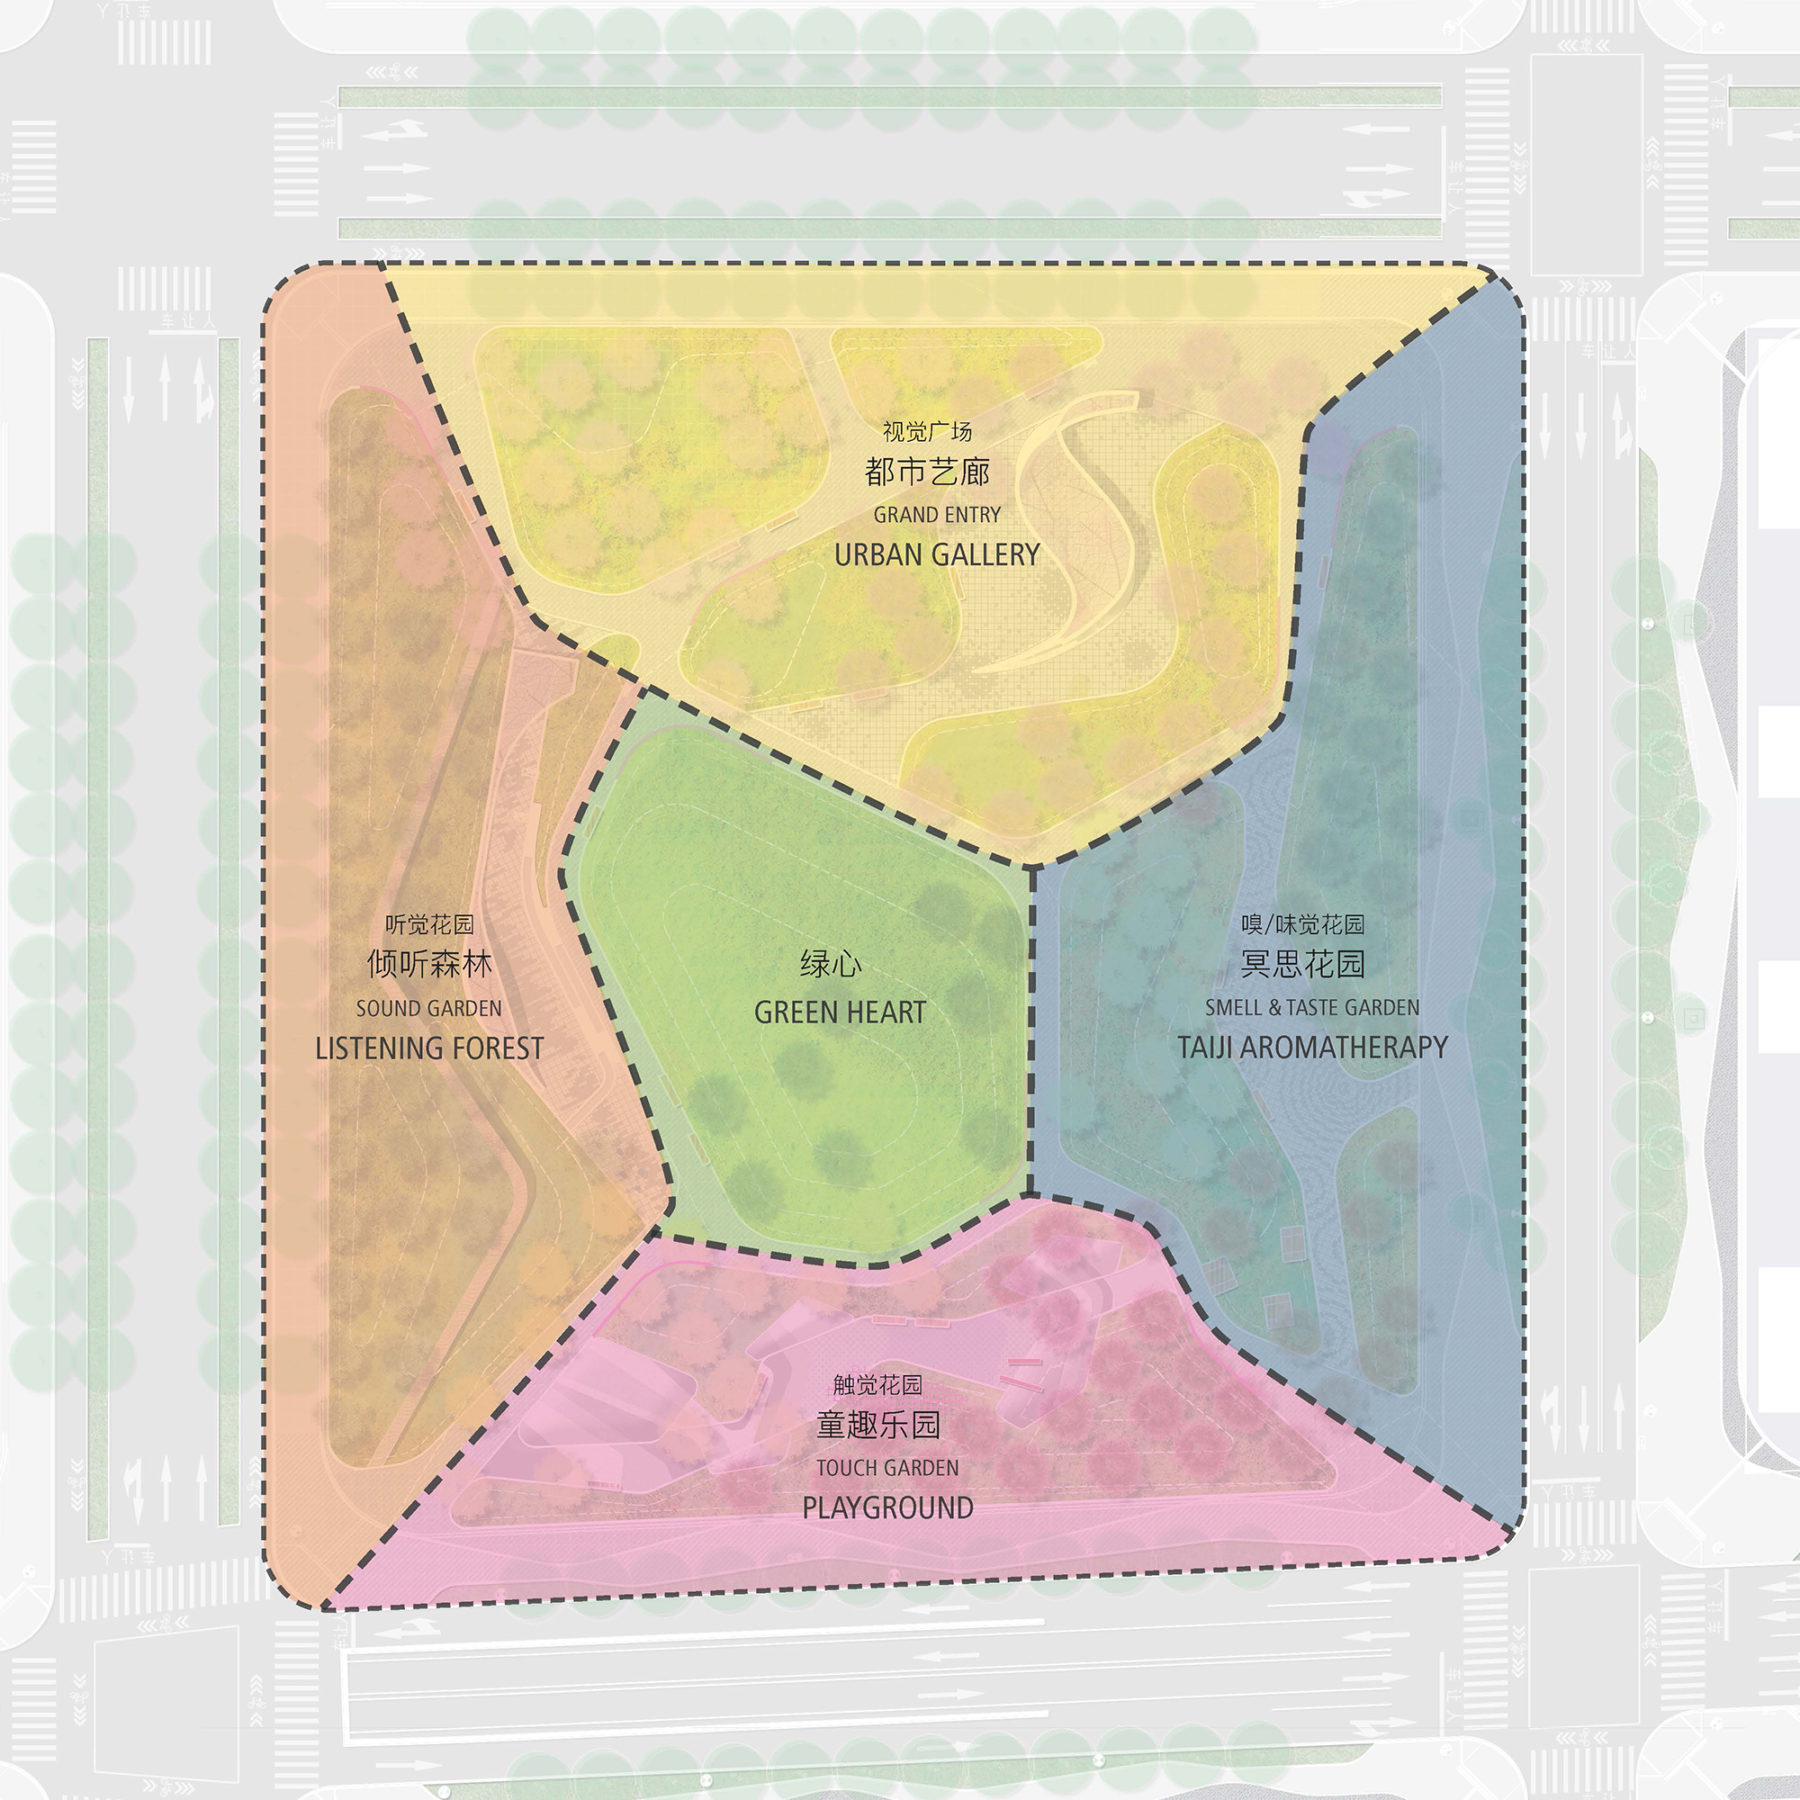 Diagram of the five subsections of the proposed park